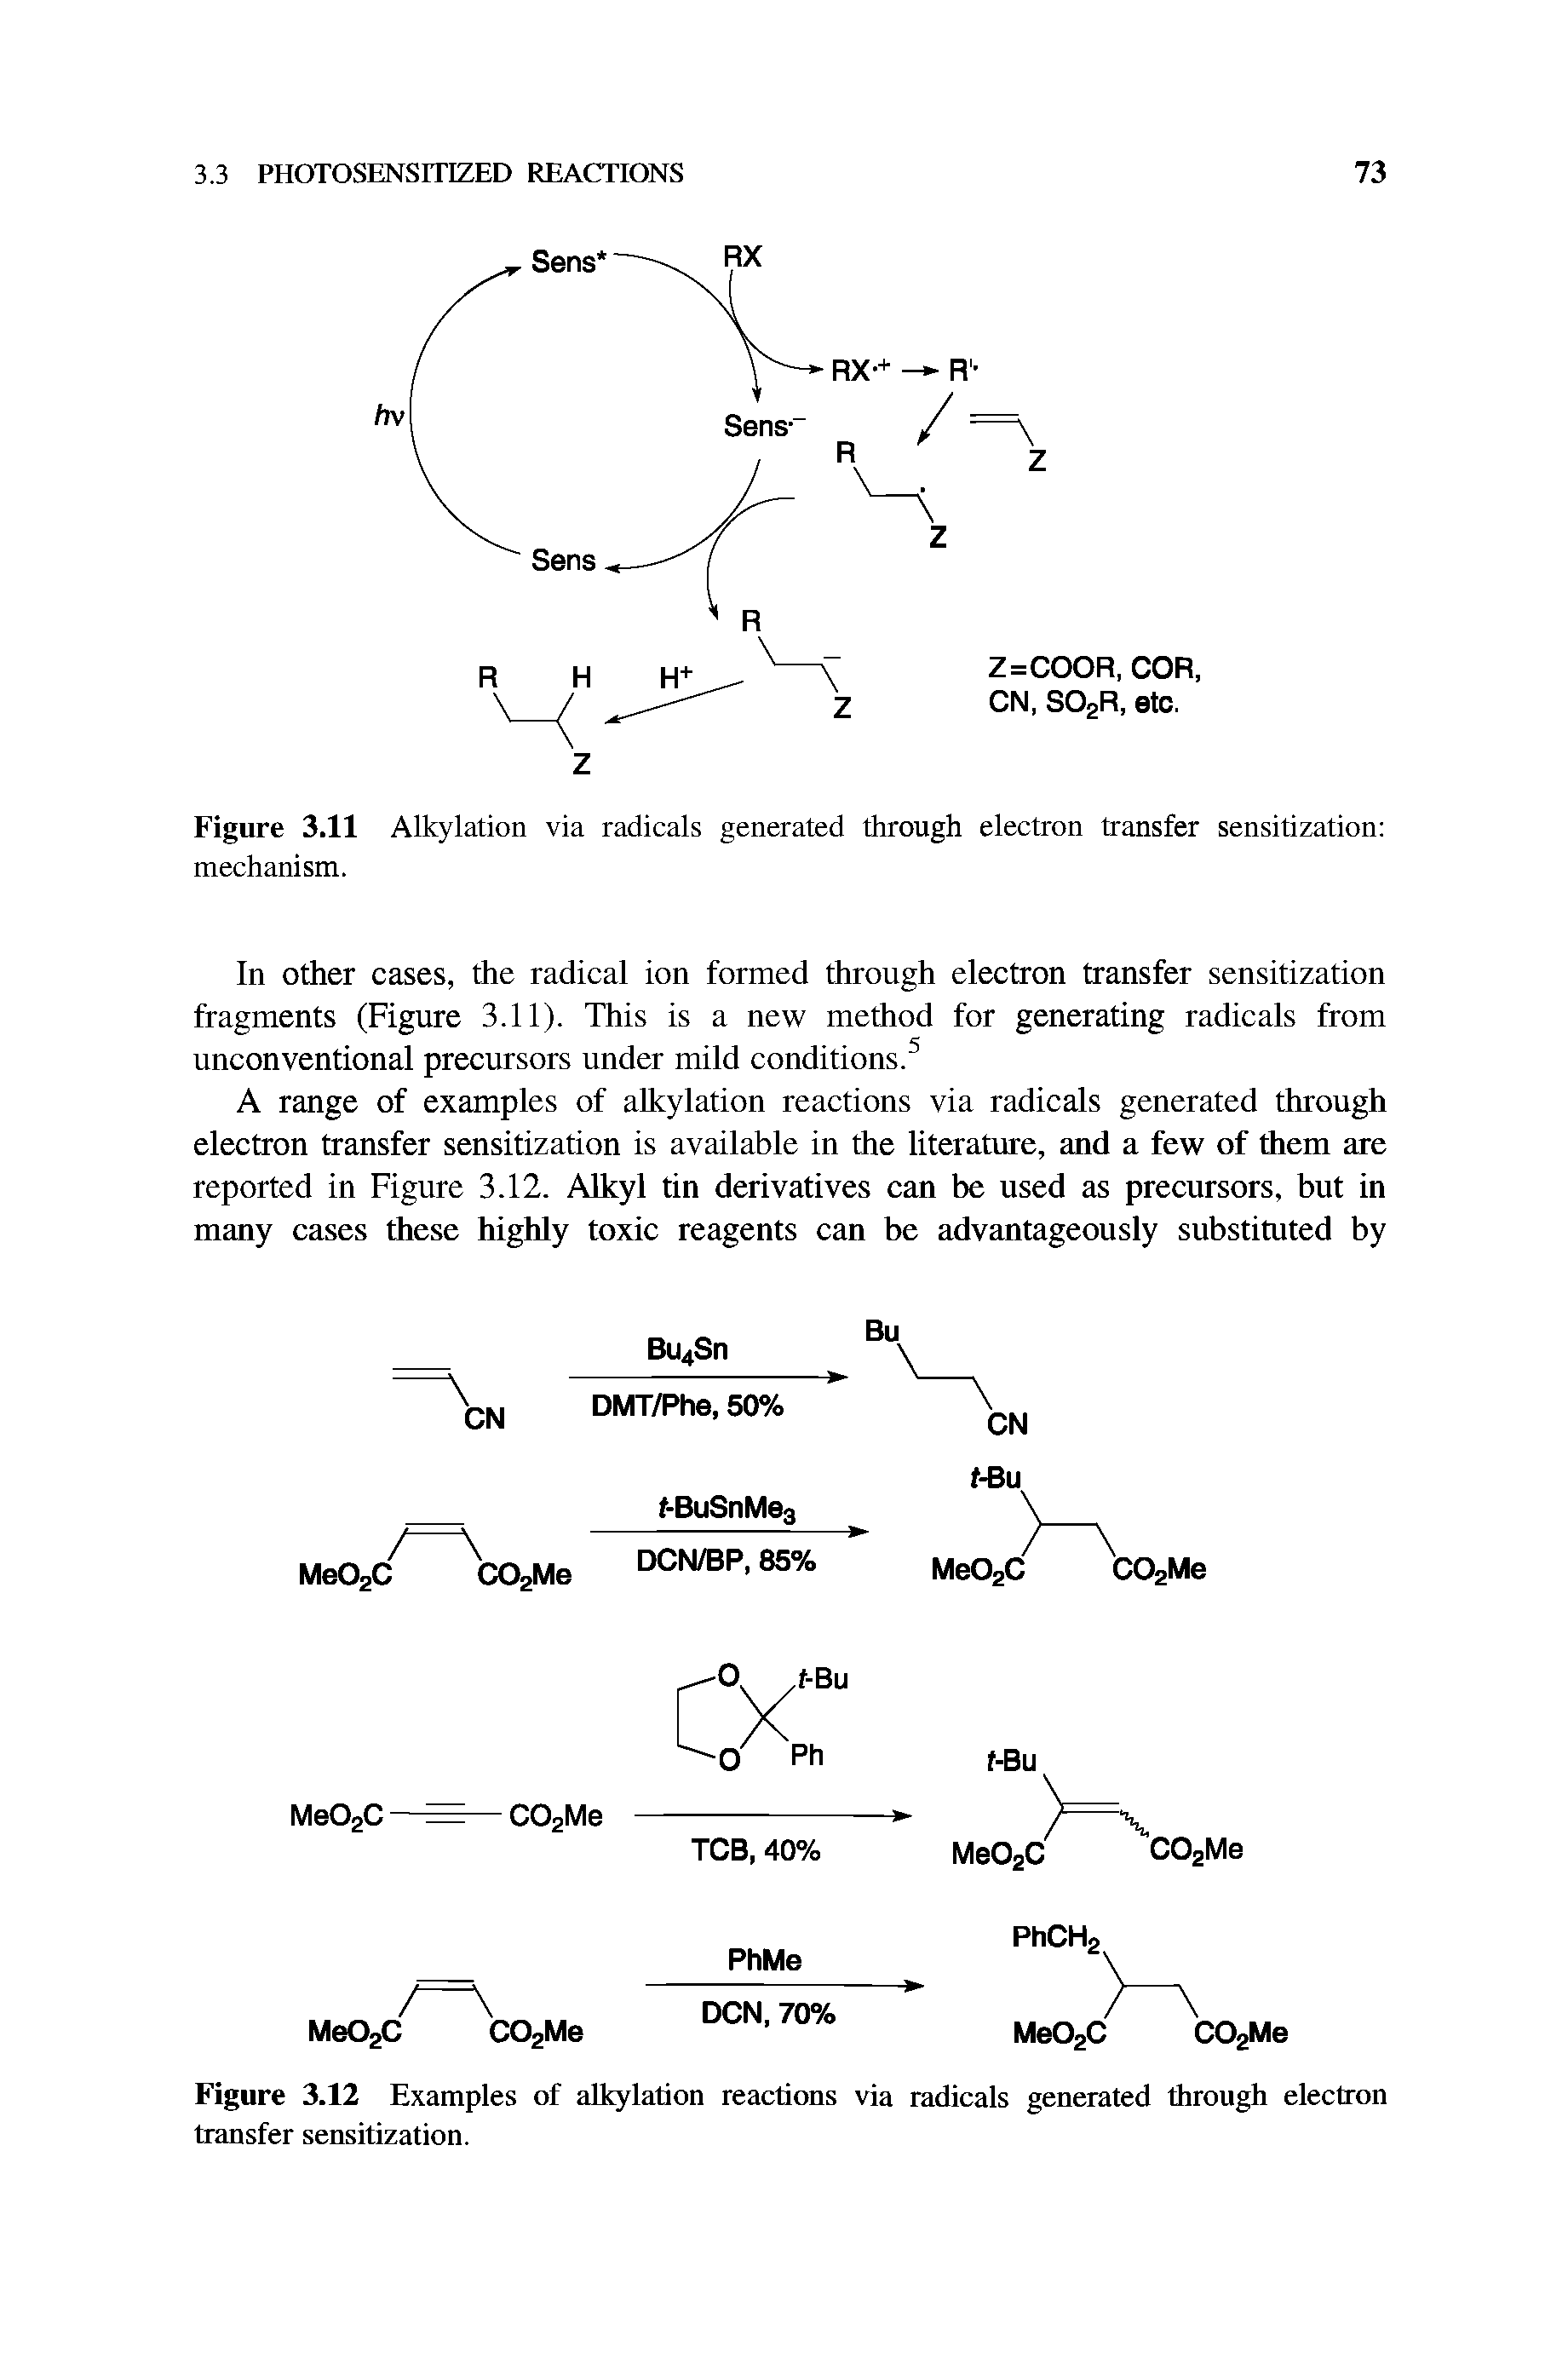 Figure 3.12 Examples of alkylation reactions via radicals generated through electron transfer sensitization.